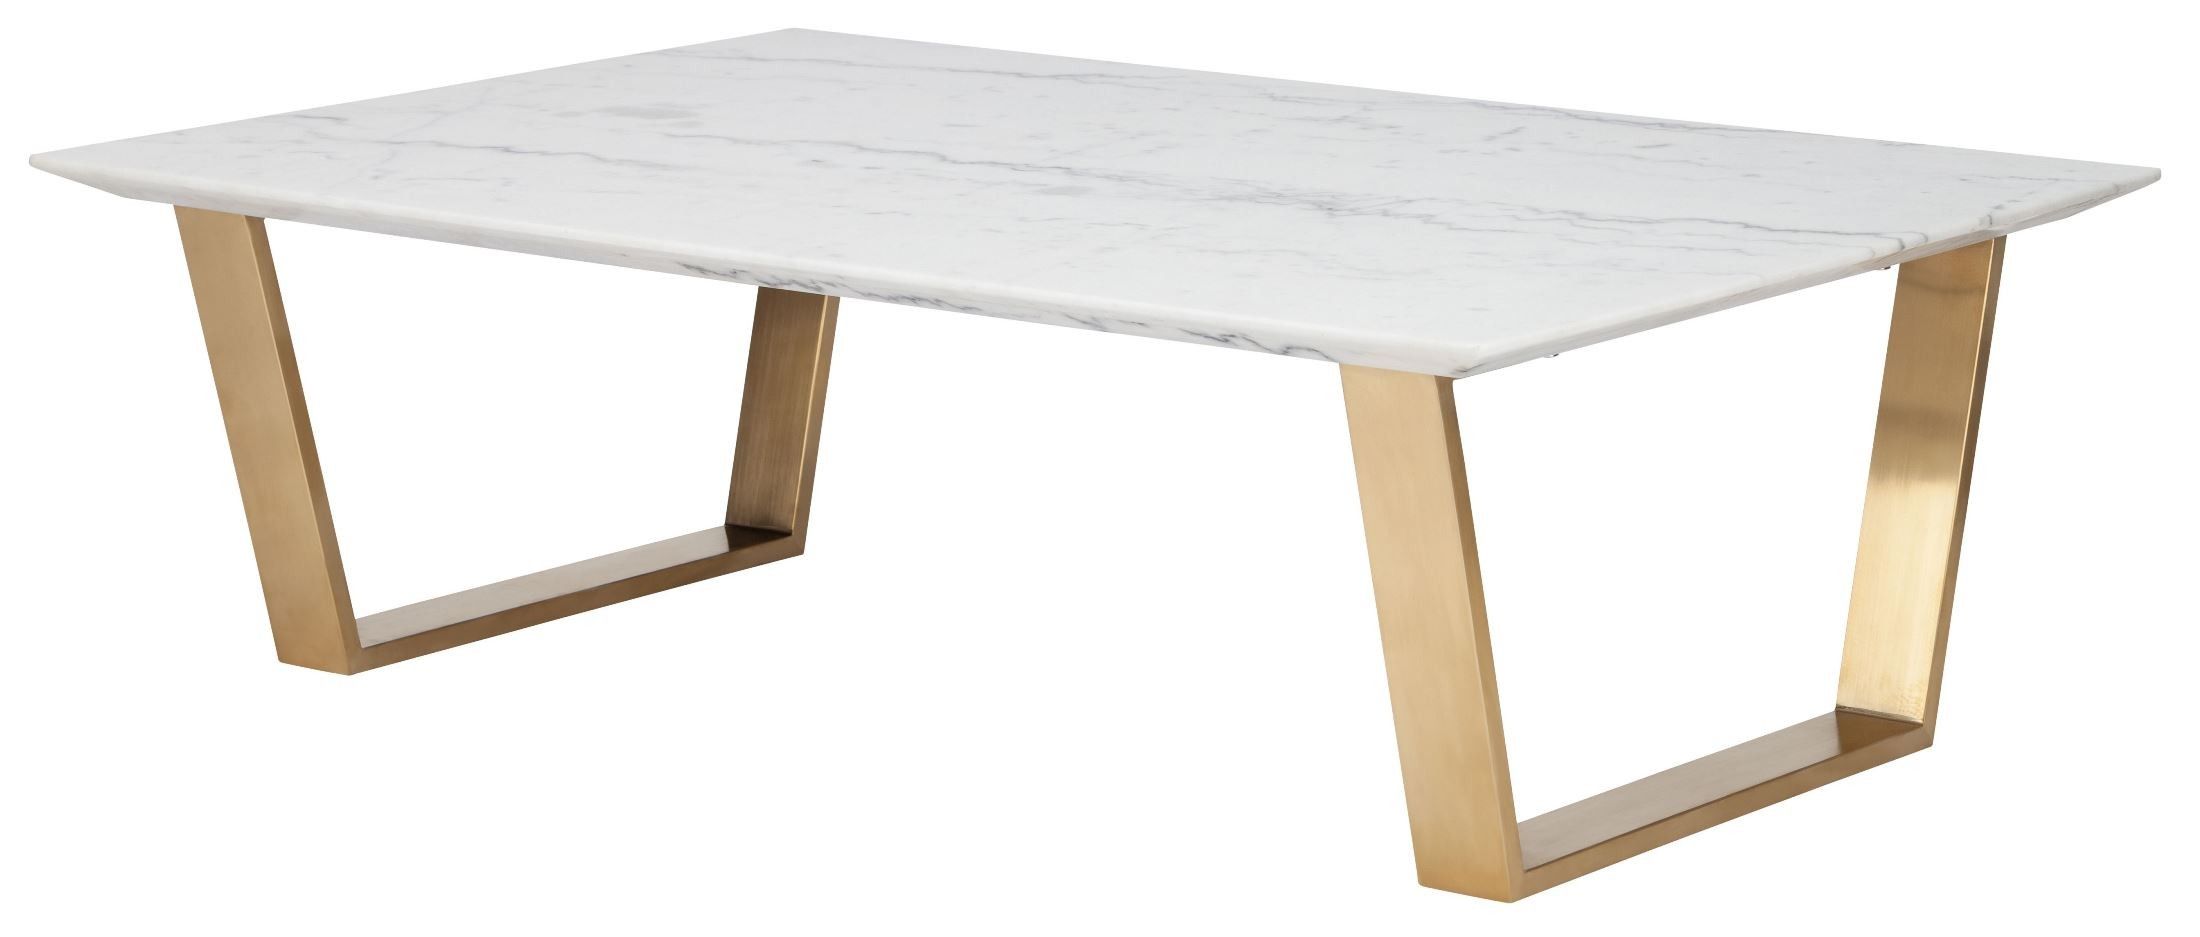 Catrine White & Gold Stone Coffee Table From Nuevo With Regard To White Marble And Gold Coffee Tables (View 15 of 15)